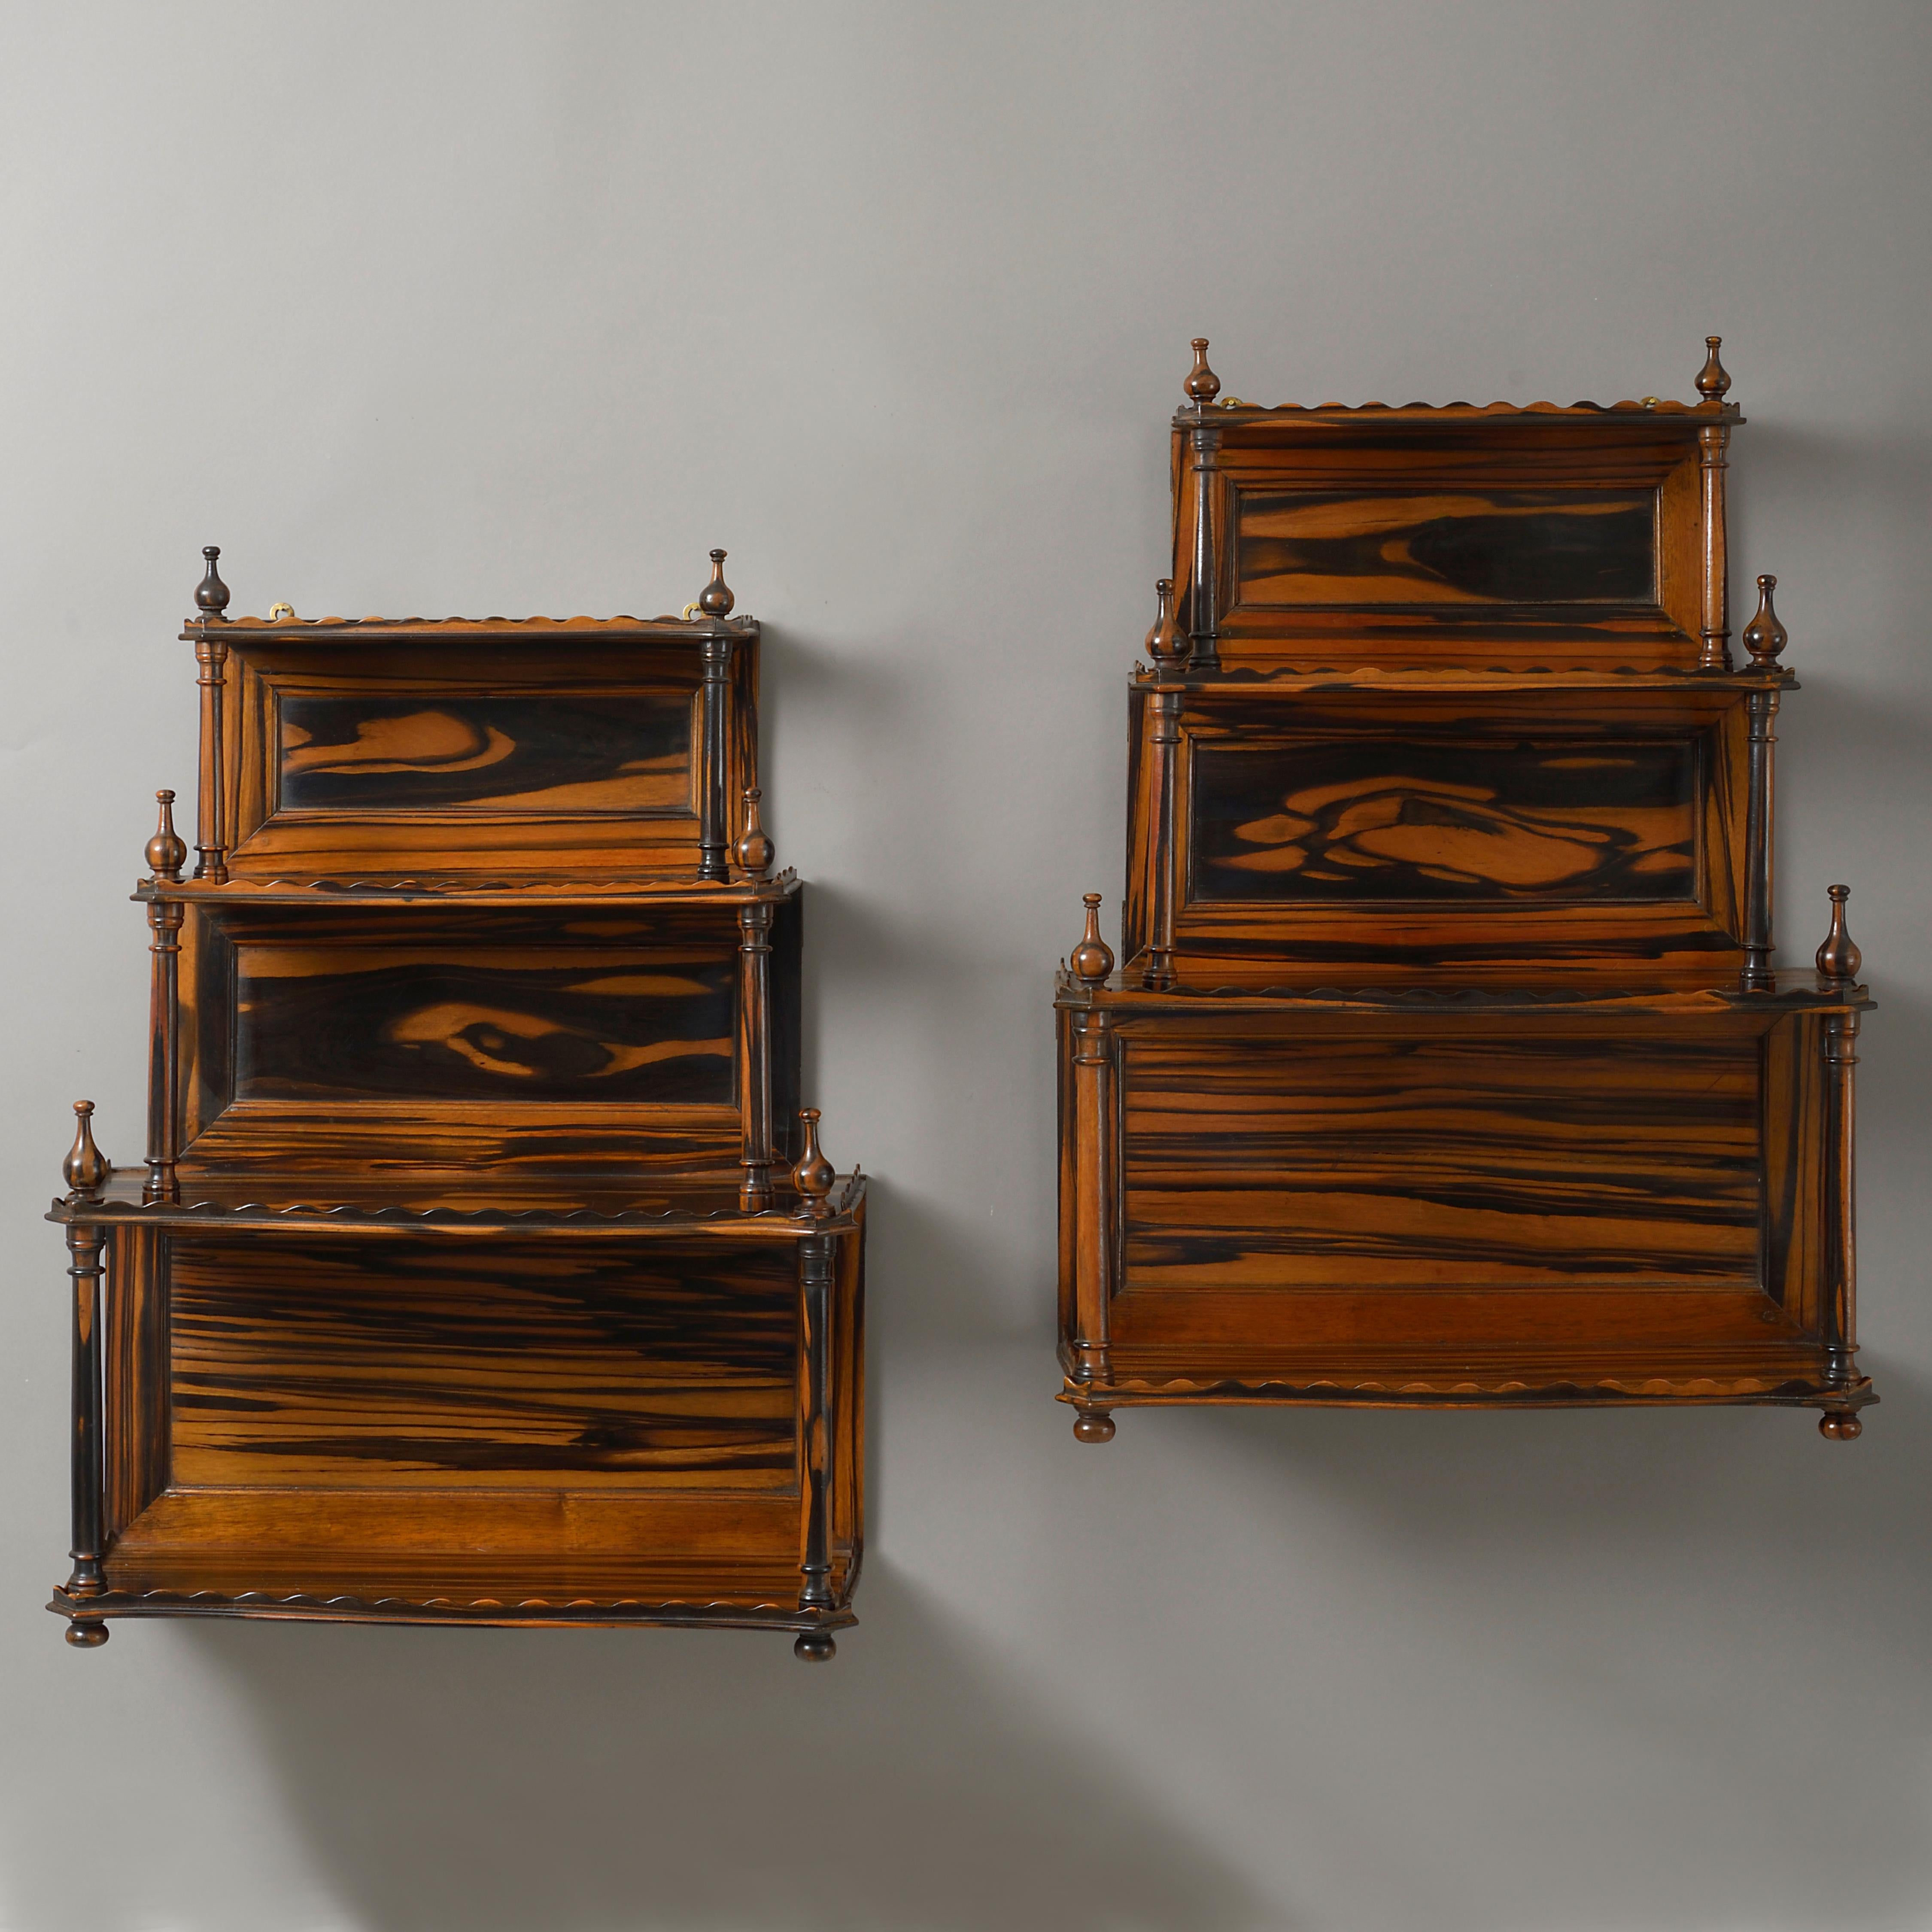 A pair of mid-19th century richly figured calamander wood hanging shelves, each having four tiers with scalloped galleries, supported by turned columns, all surmounted by finials, the backs with fielded panels.